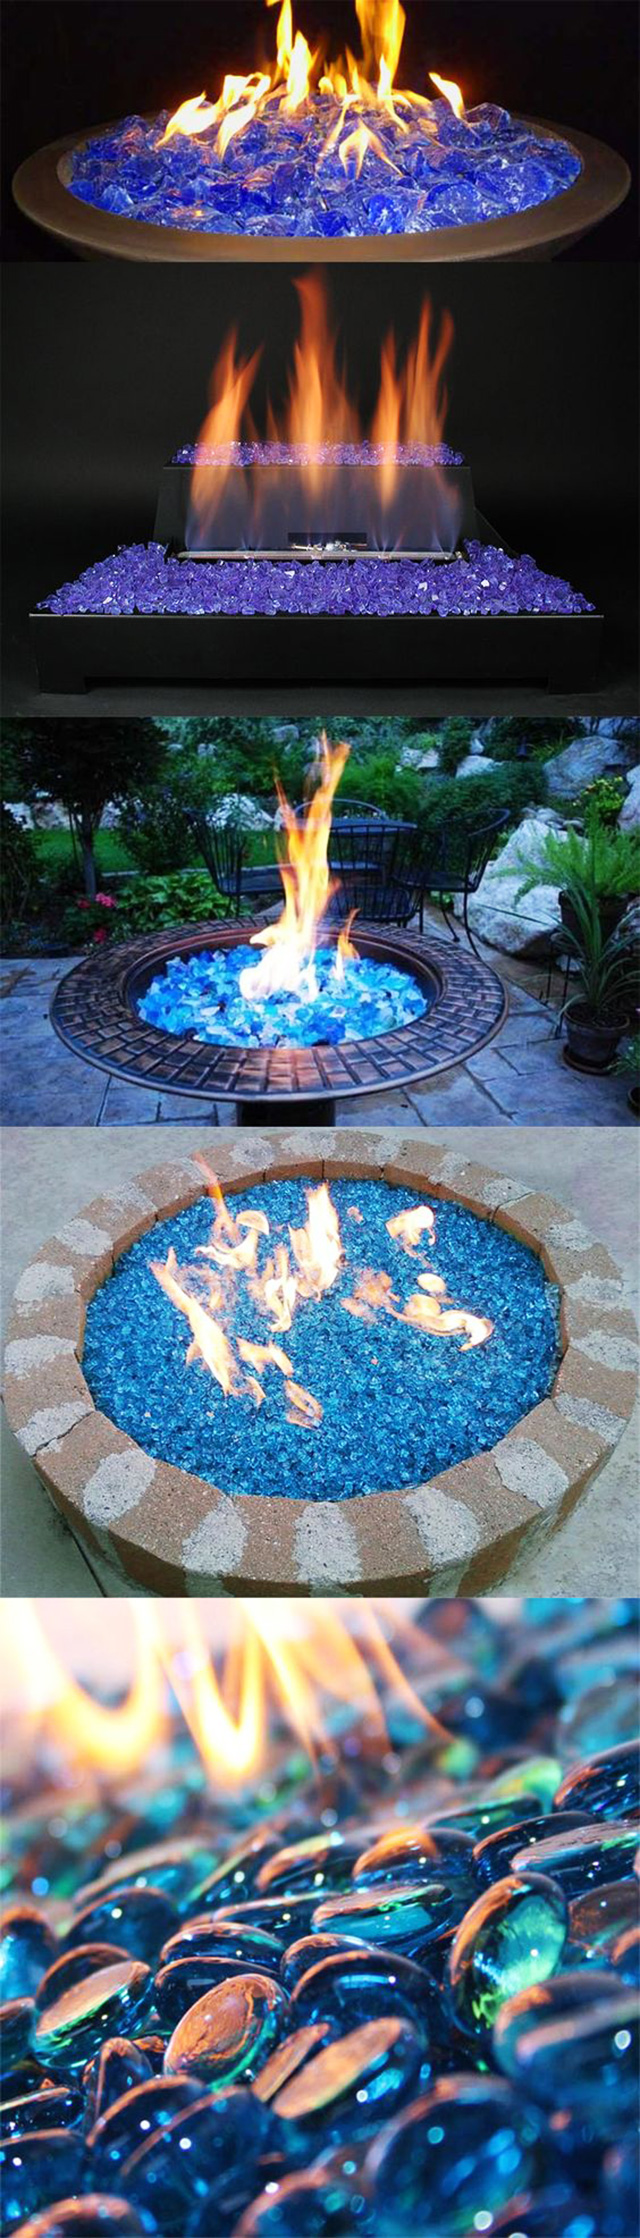 Use Fire glass to Transform Your Fire Pit into a Magical Display of Colors. 